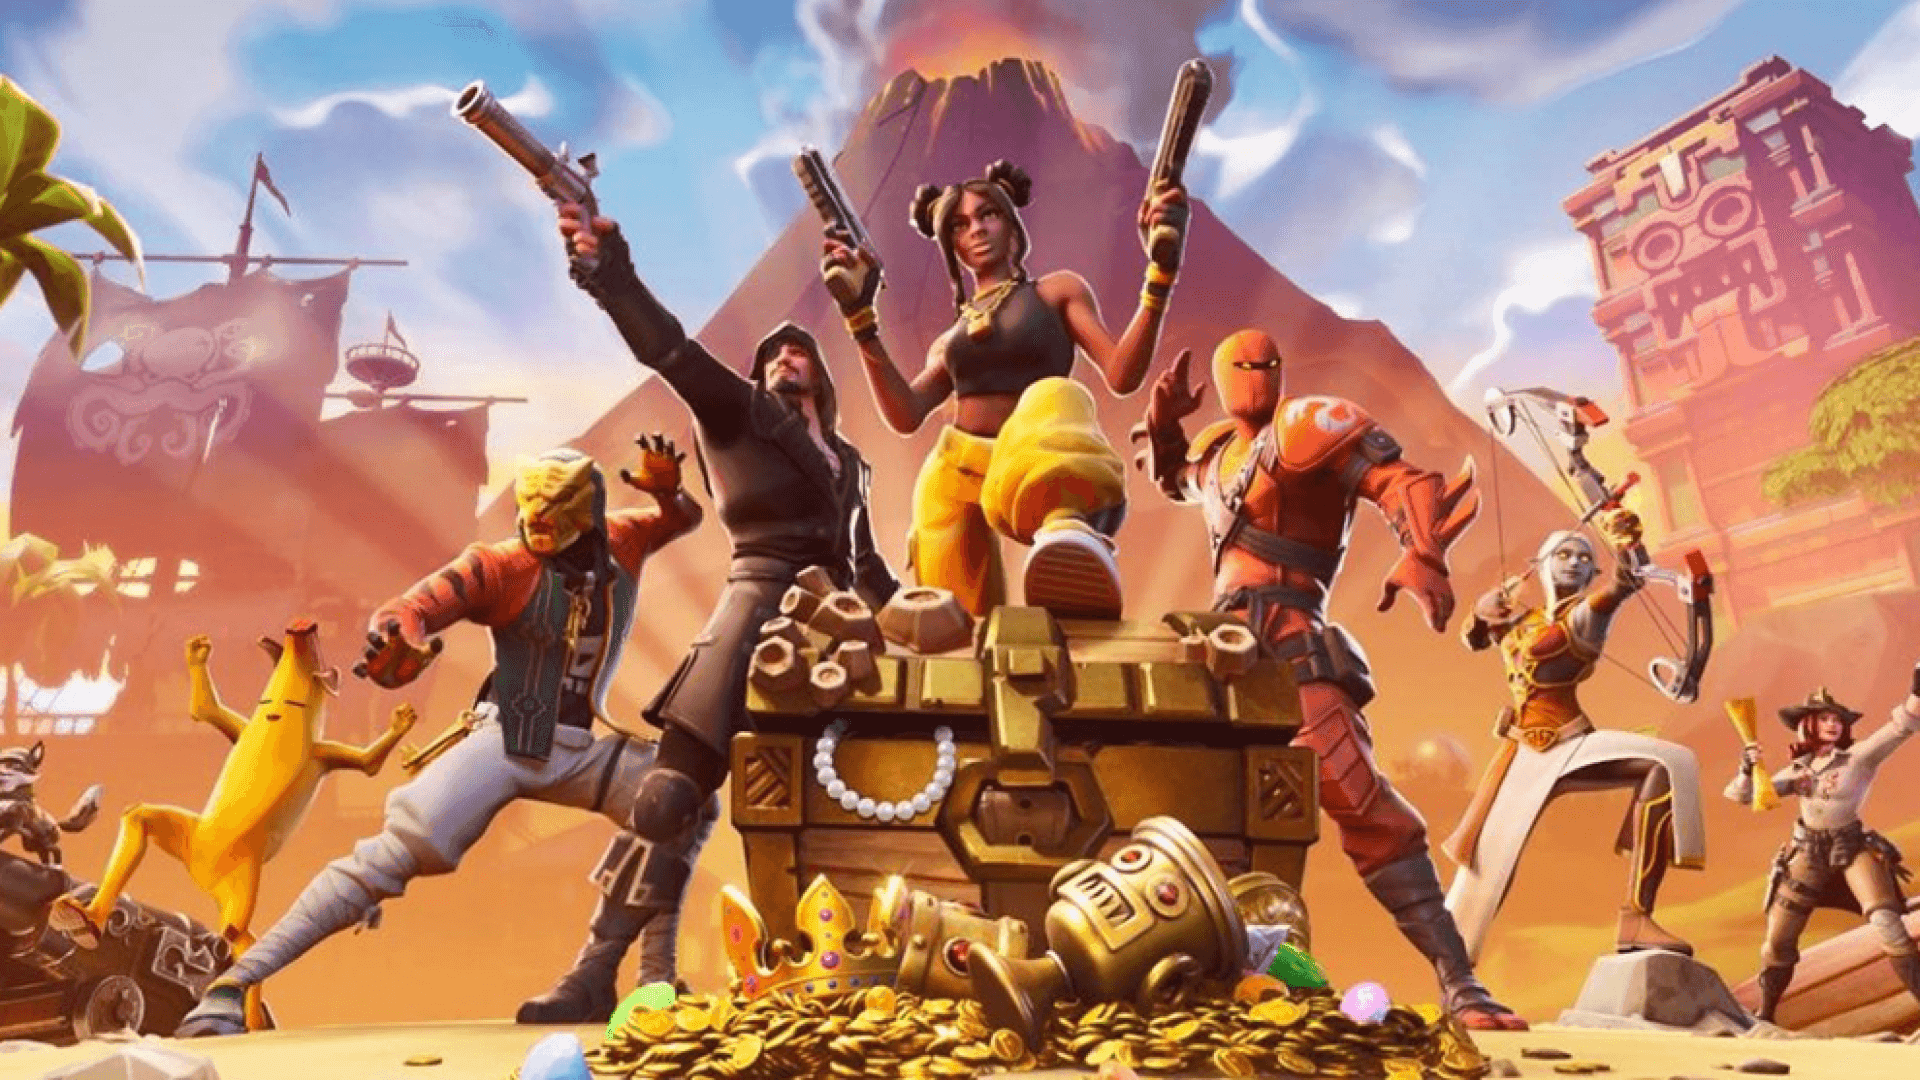 Fortnite feature image